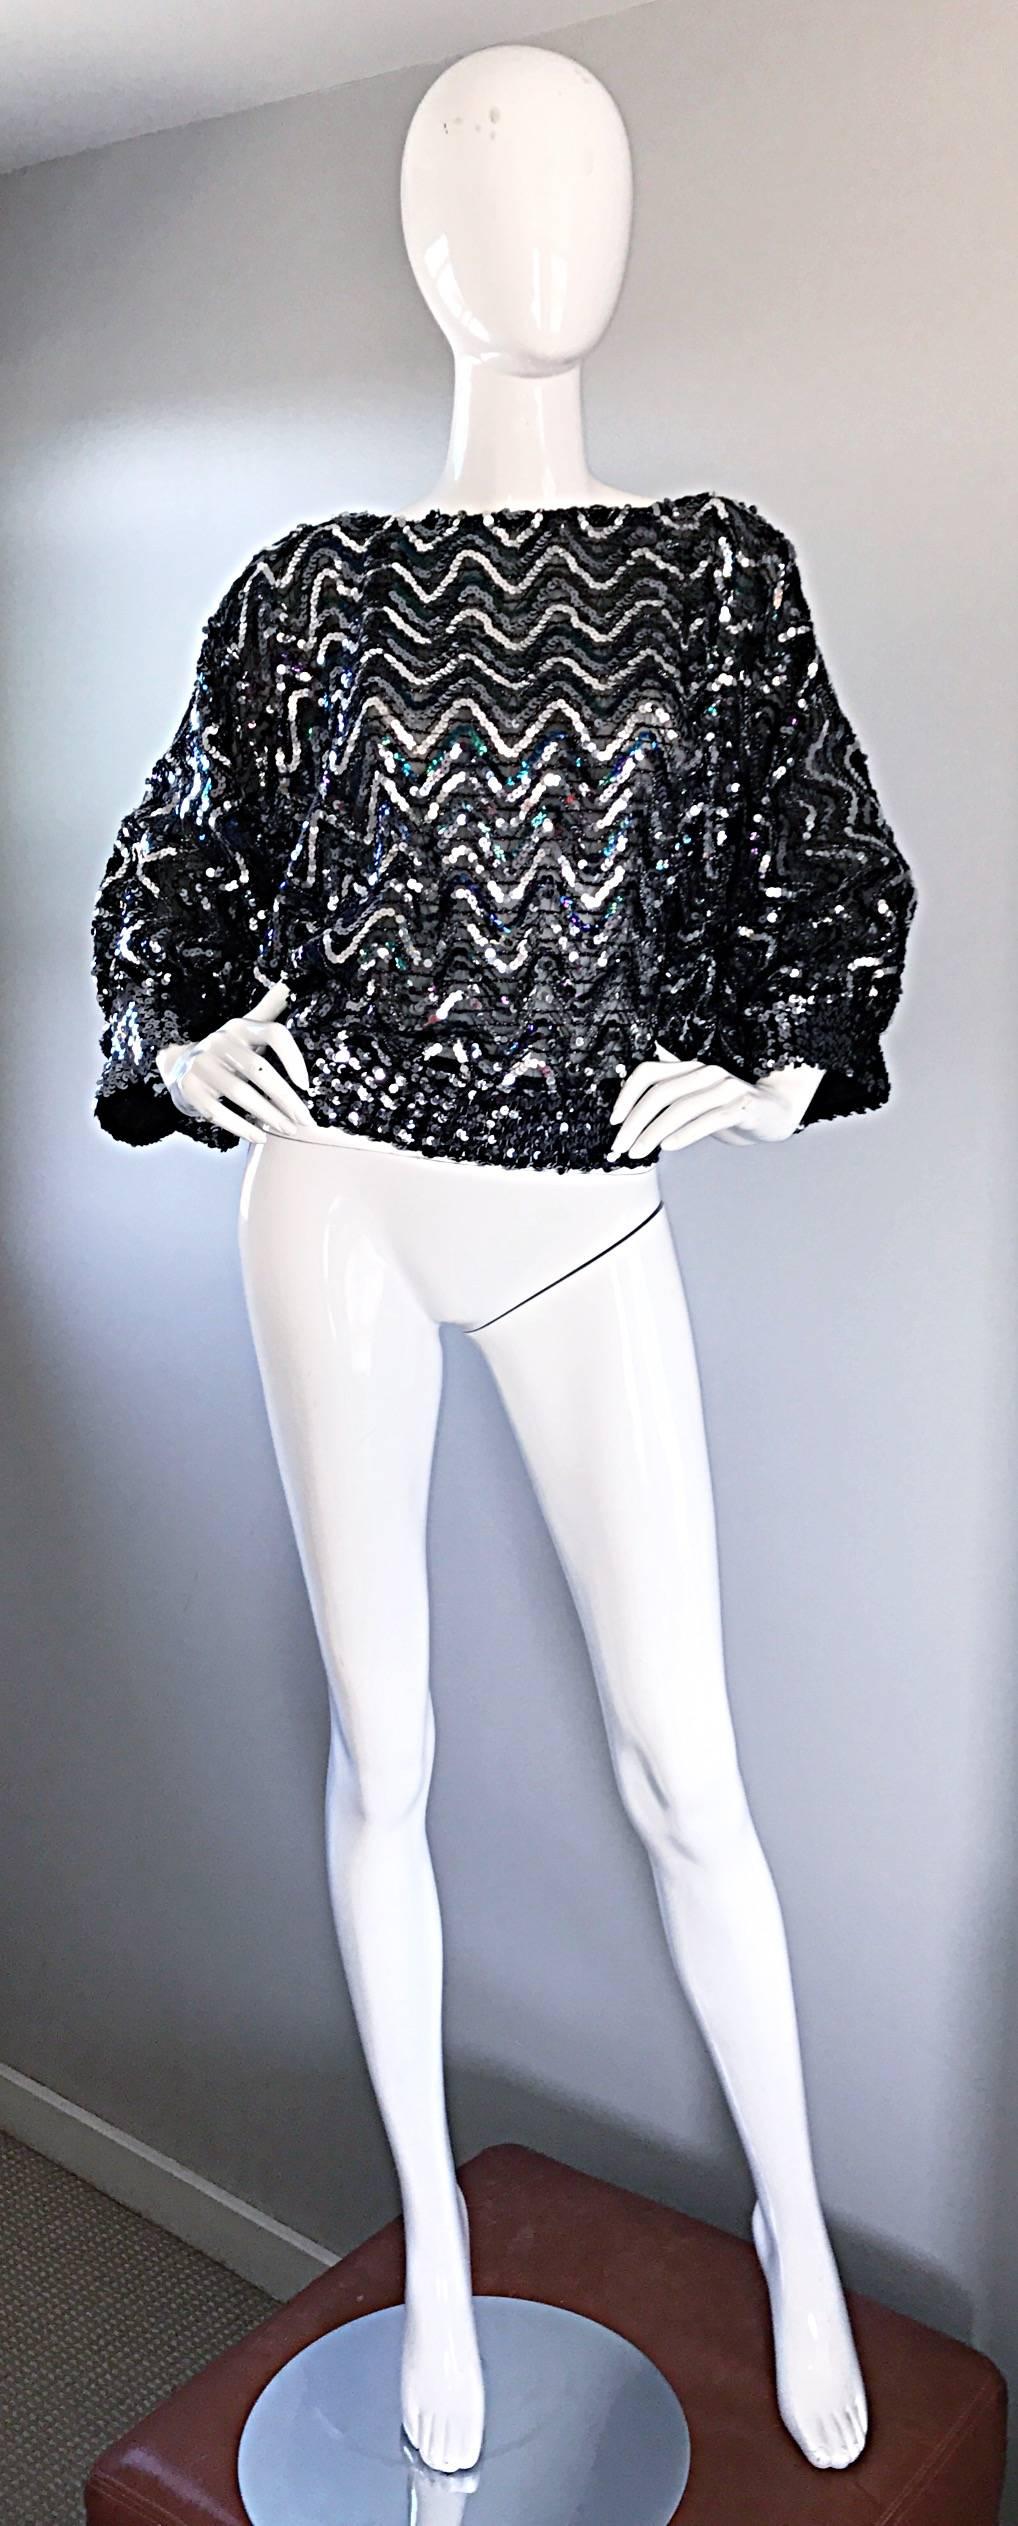 1970s Colorful + Silver Fully Sequined 70s Dolman Sleeve Disco Blouse Top Shirt  6